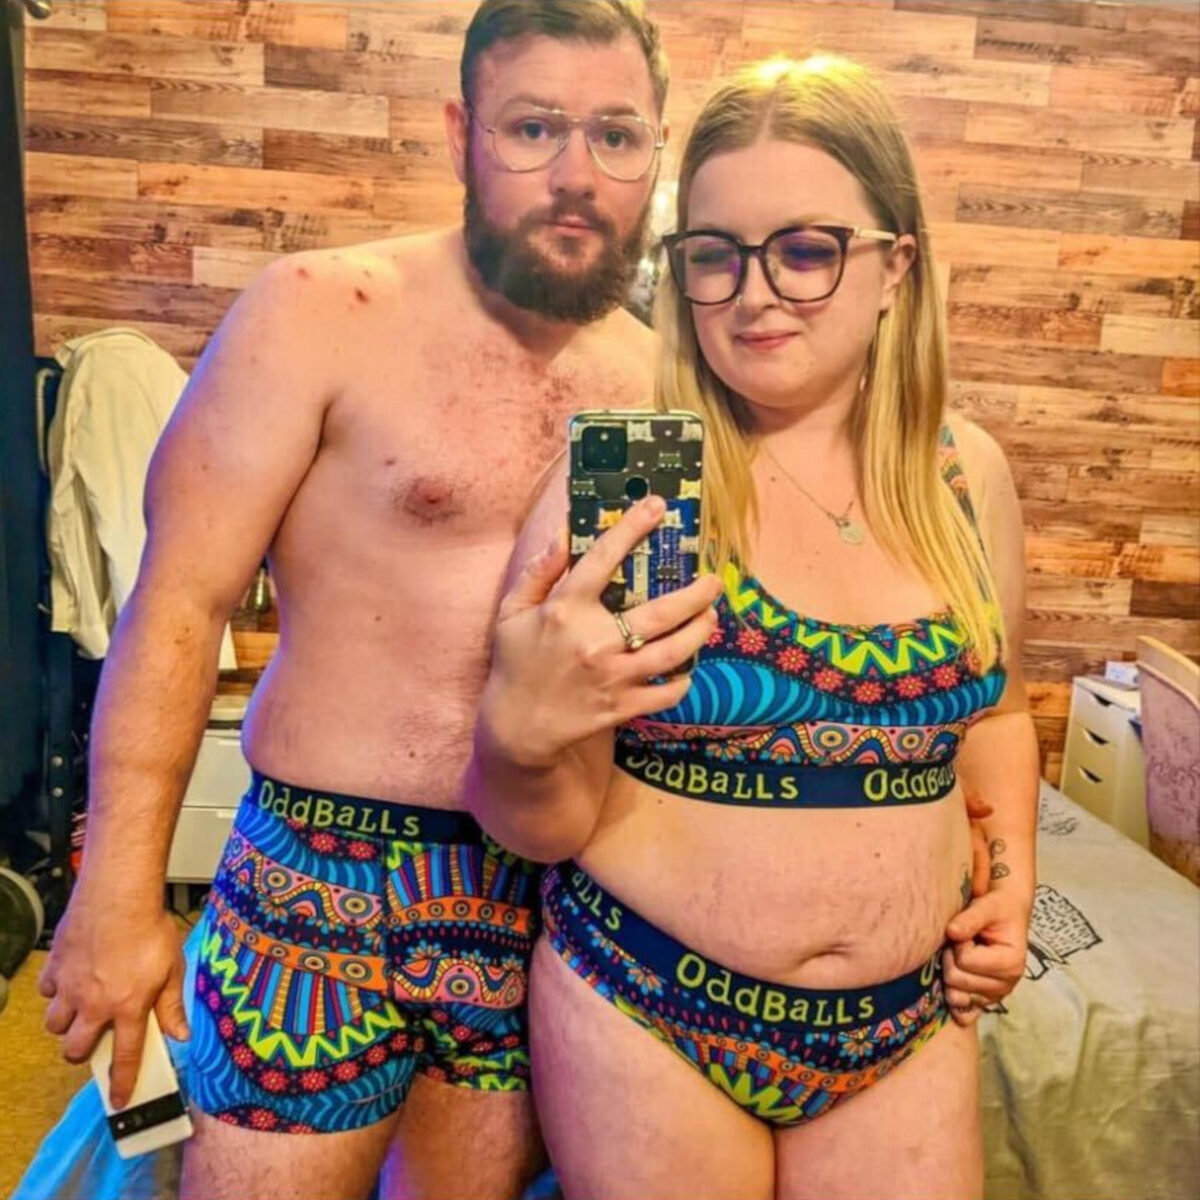 Oddballs praised for using real bodies in social media ad campaign